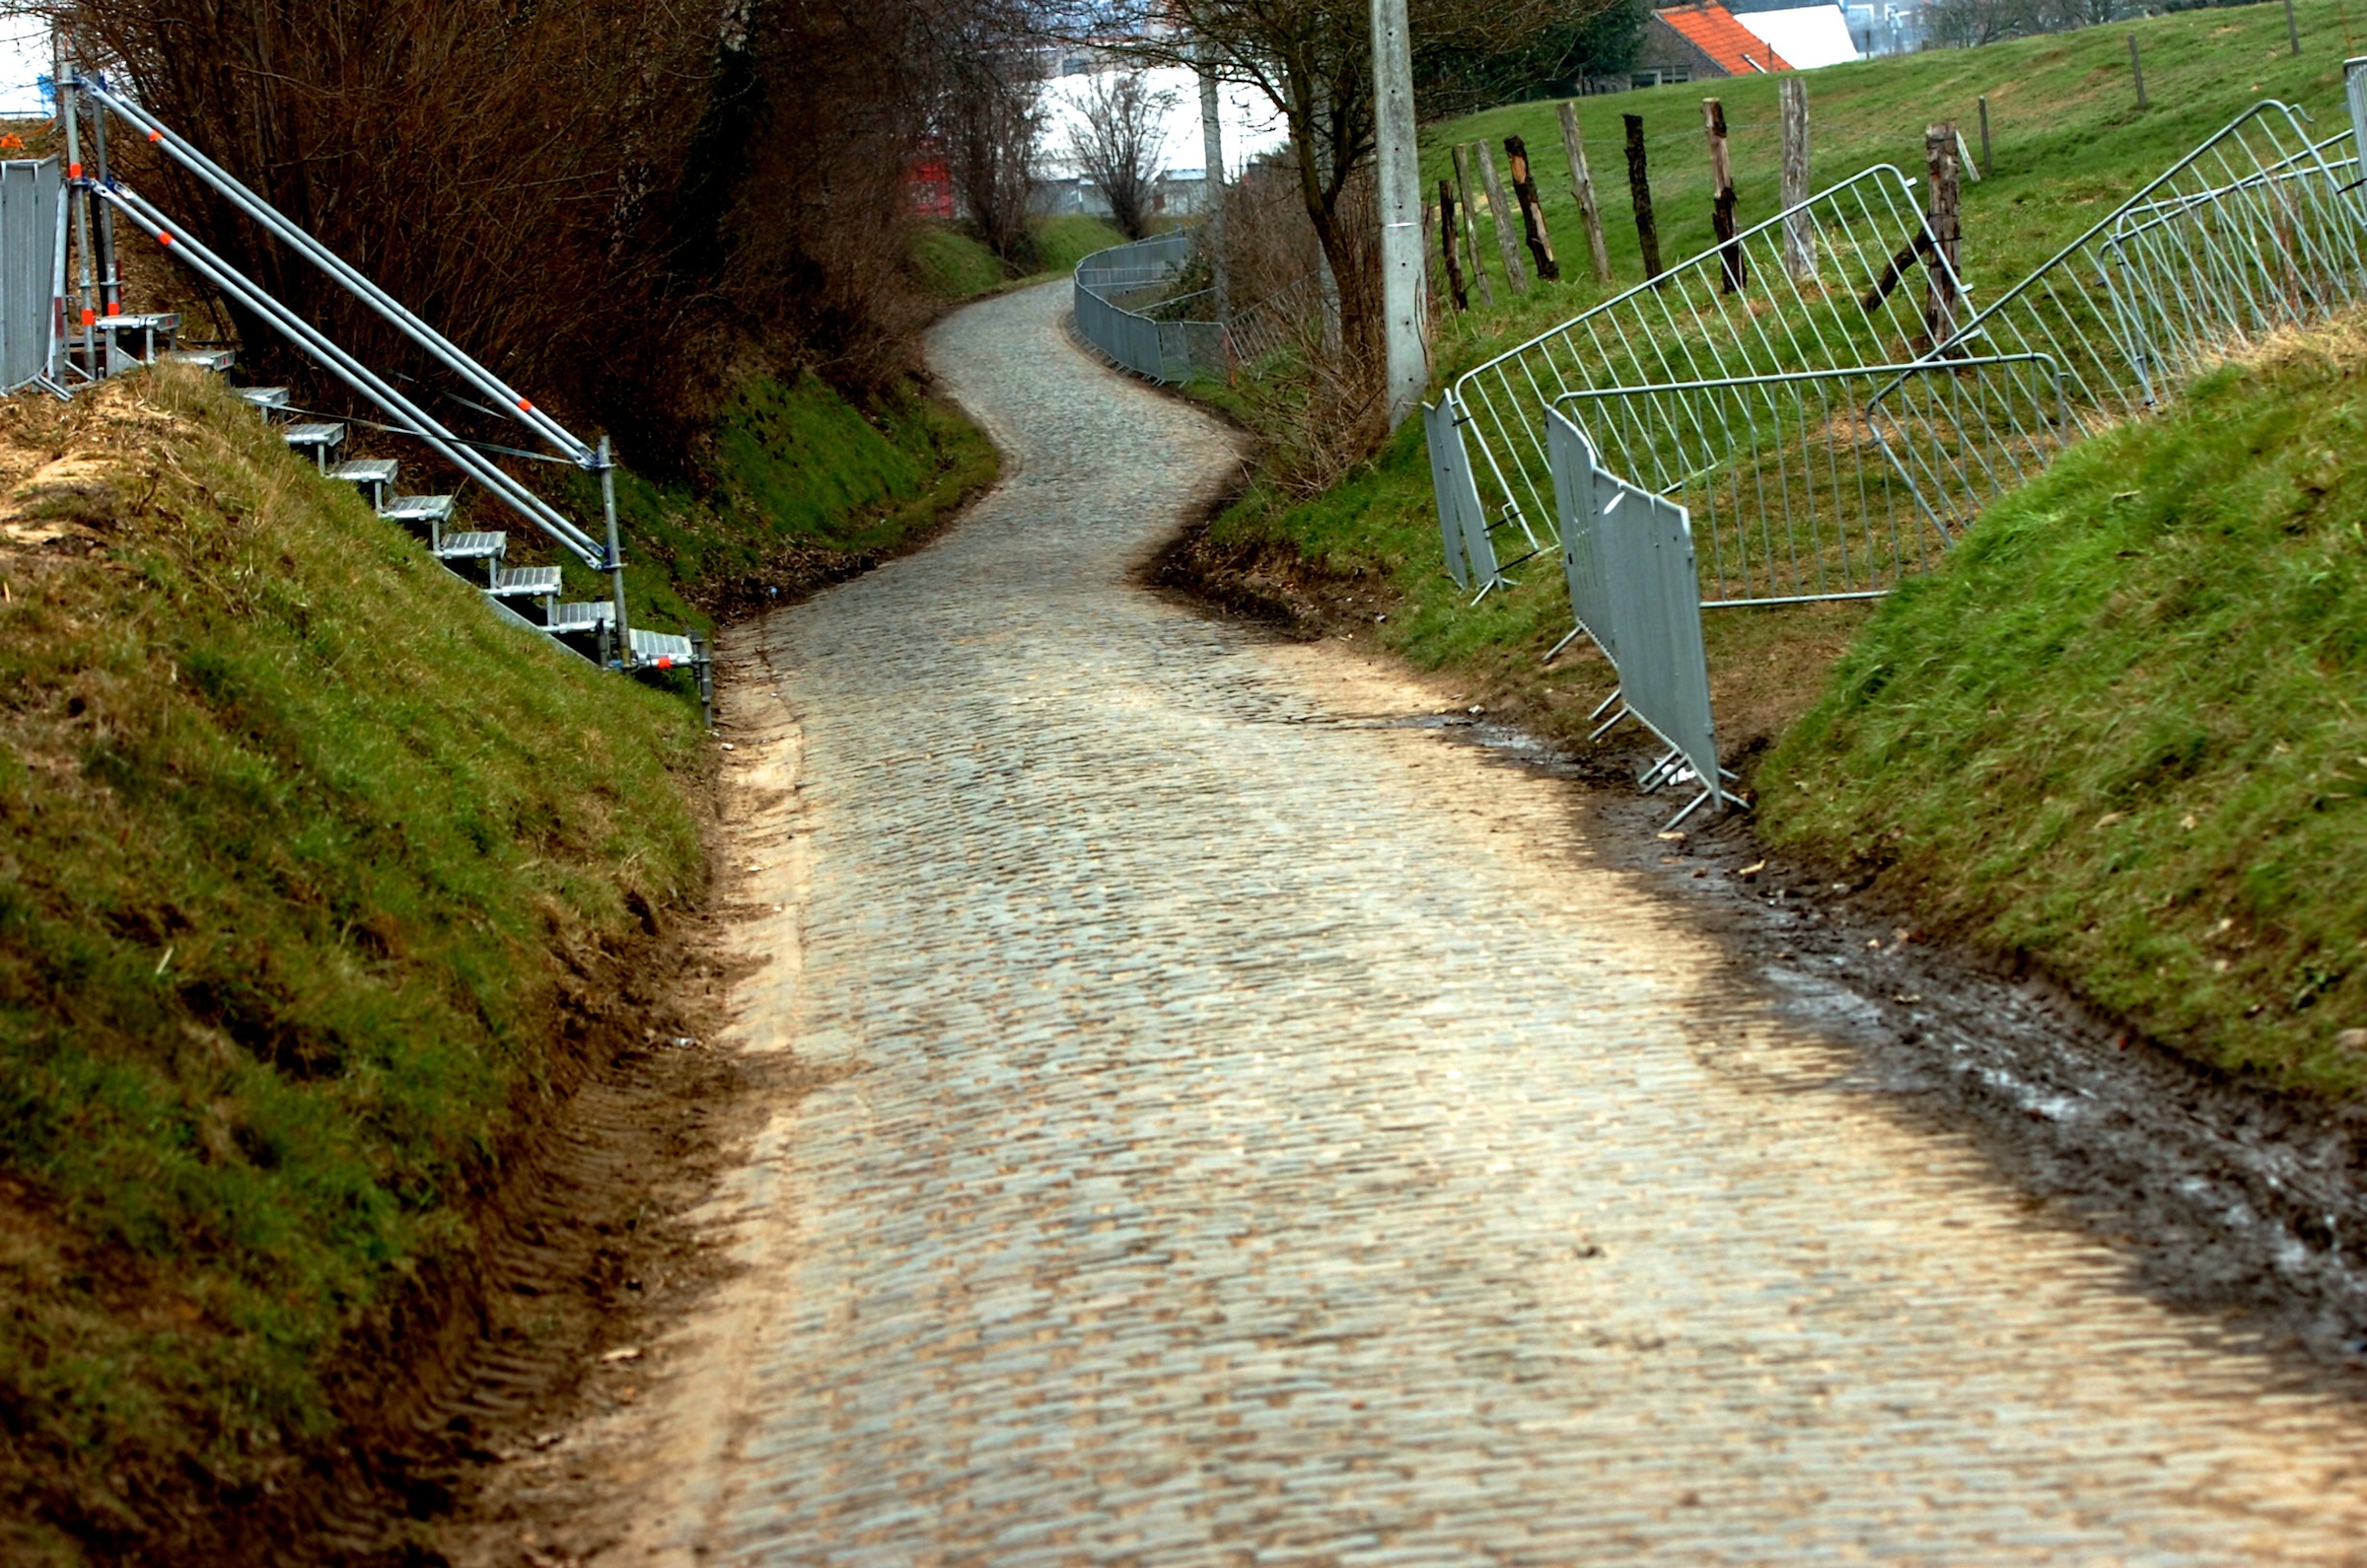 Oude Kwaremont, Tour of Flanders, pic: ©Stefano Sirotti